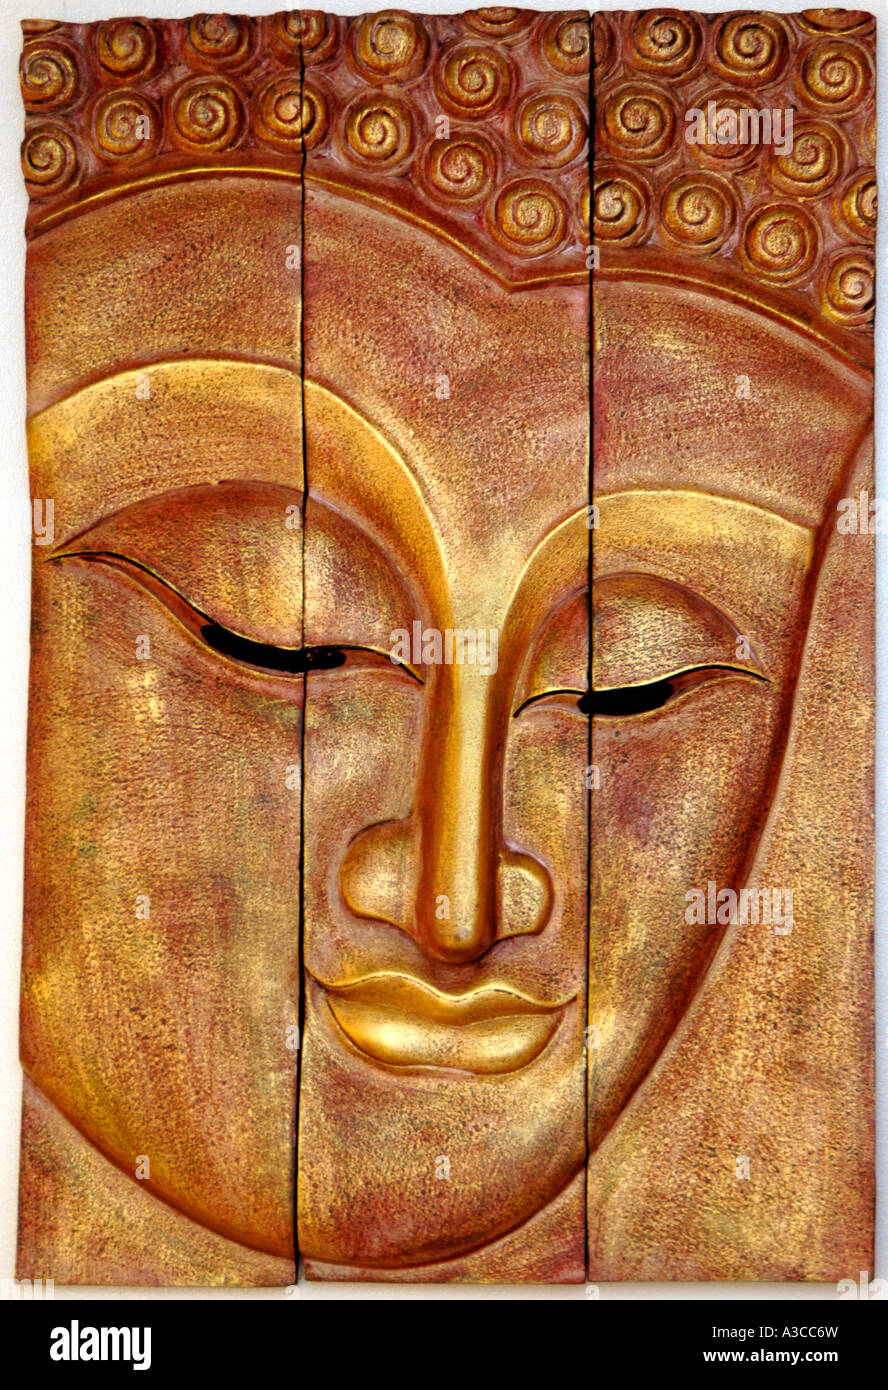 budda buddah showing golden face close up detail religion gods deity priest prophet face icon blessed holy church temple picture Stock Photo